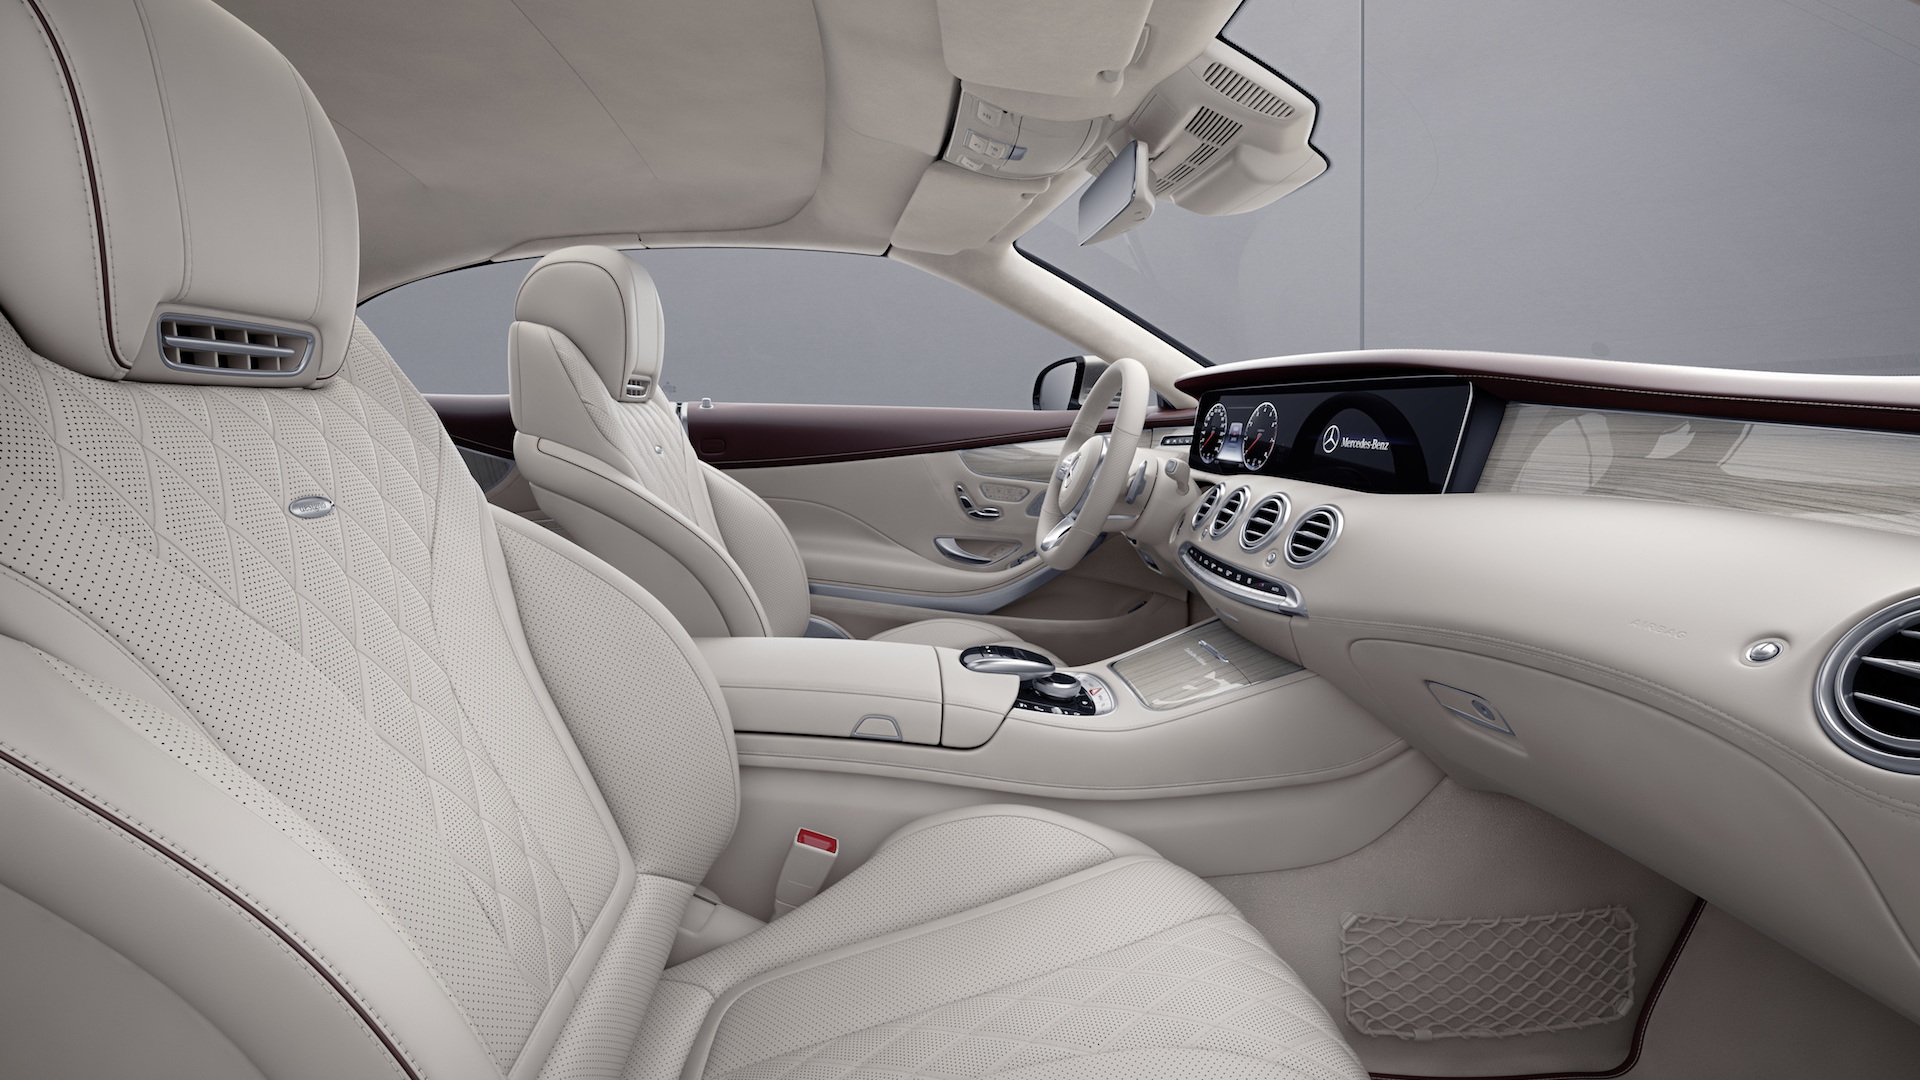 Mercedes-Benz S-Class Exclusive Edition